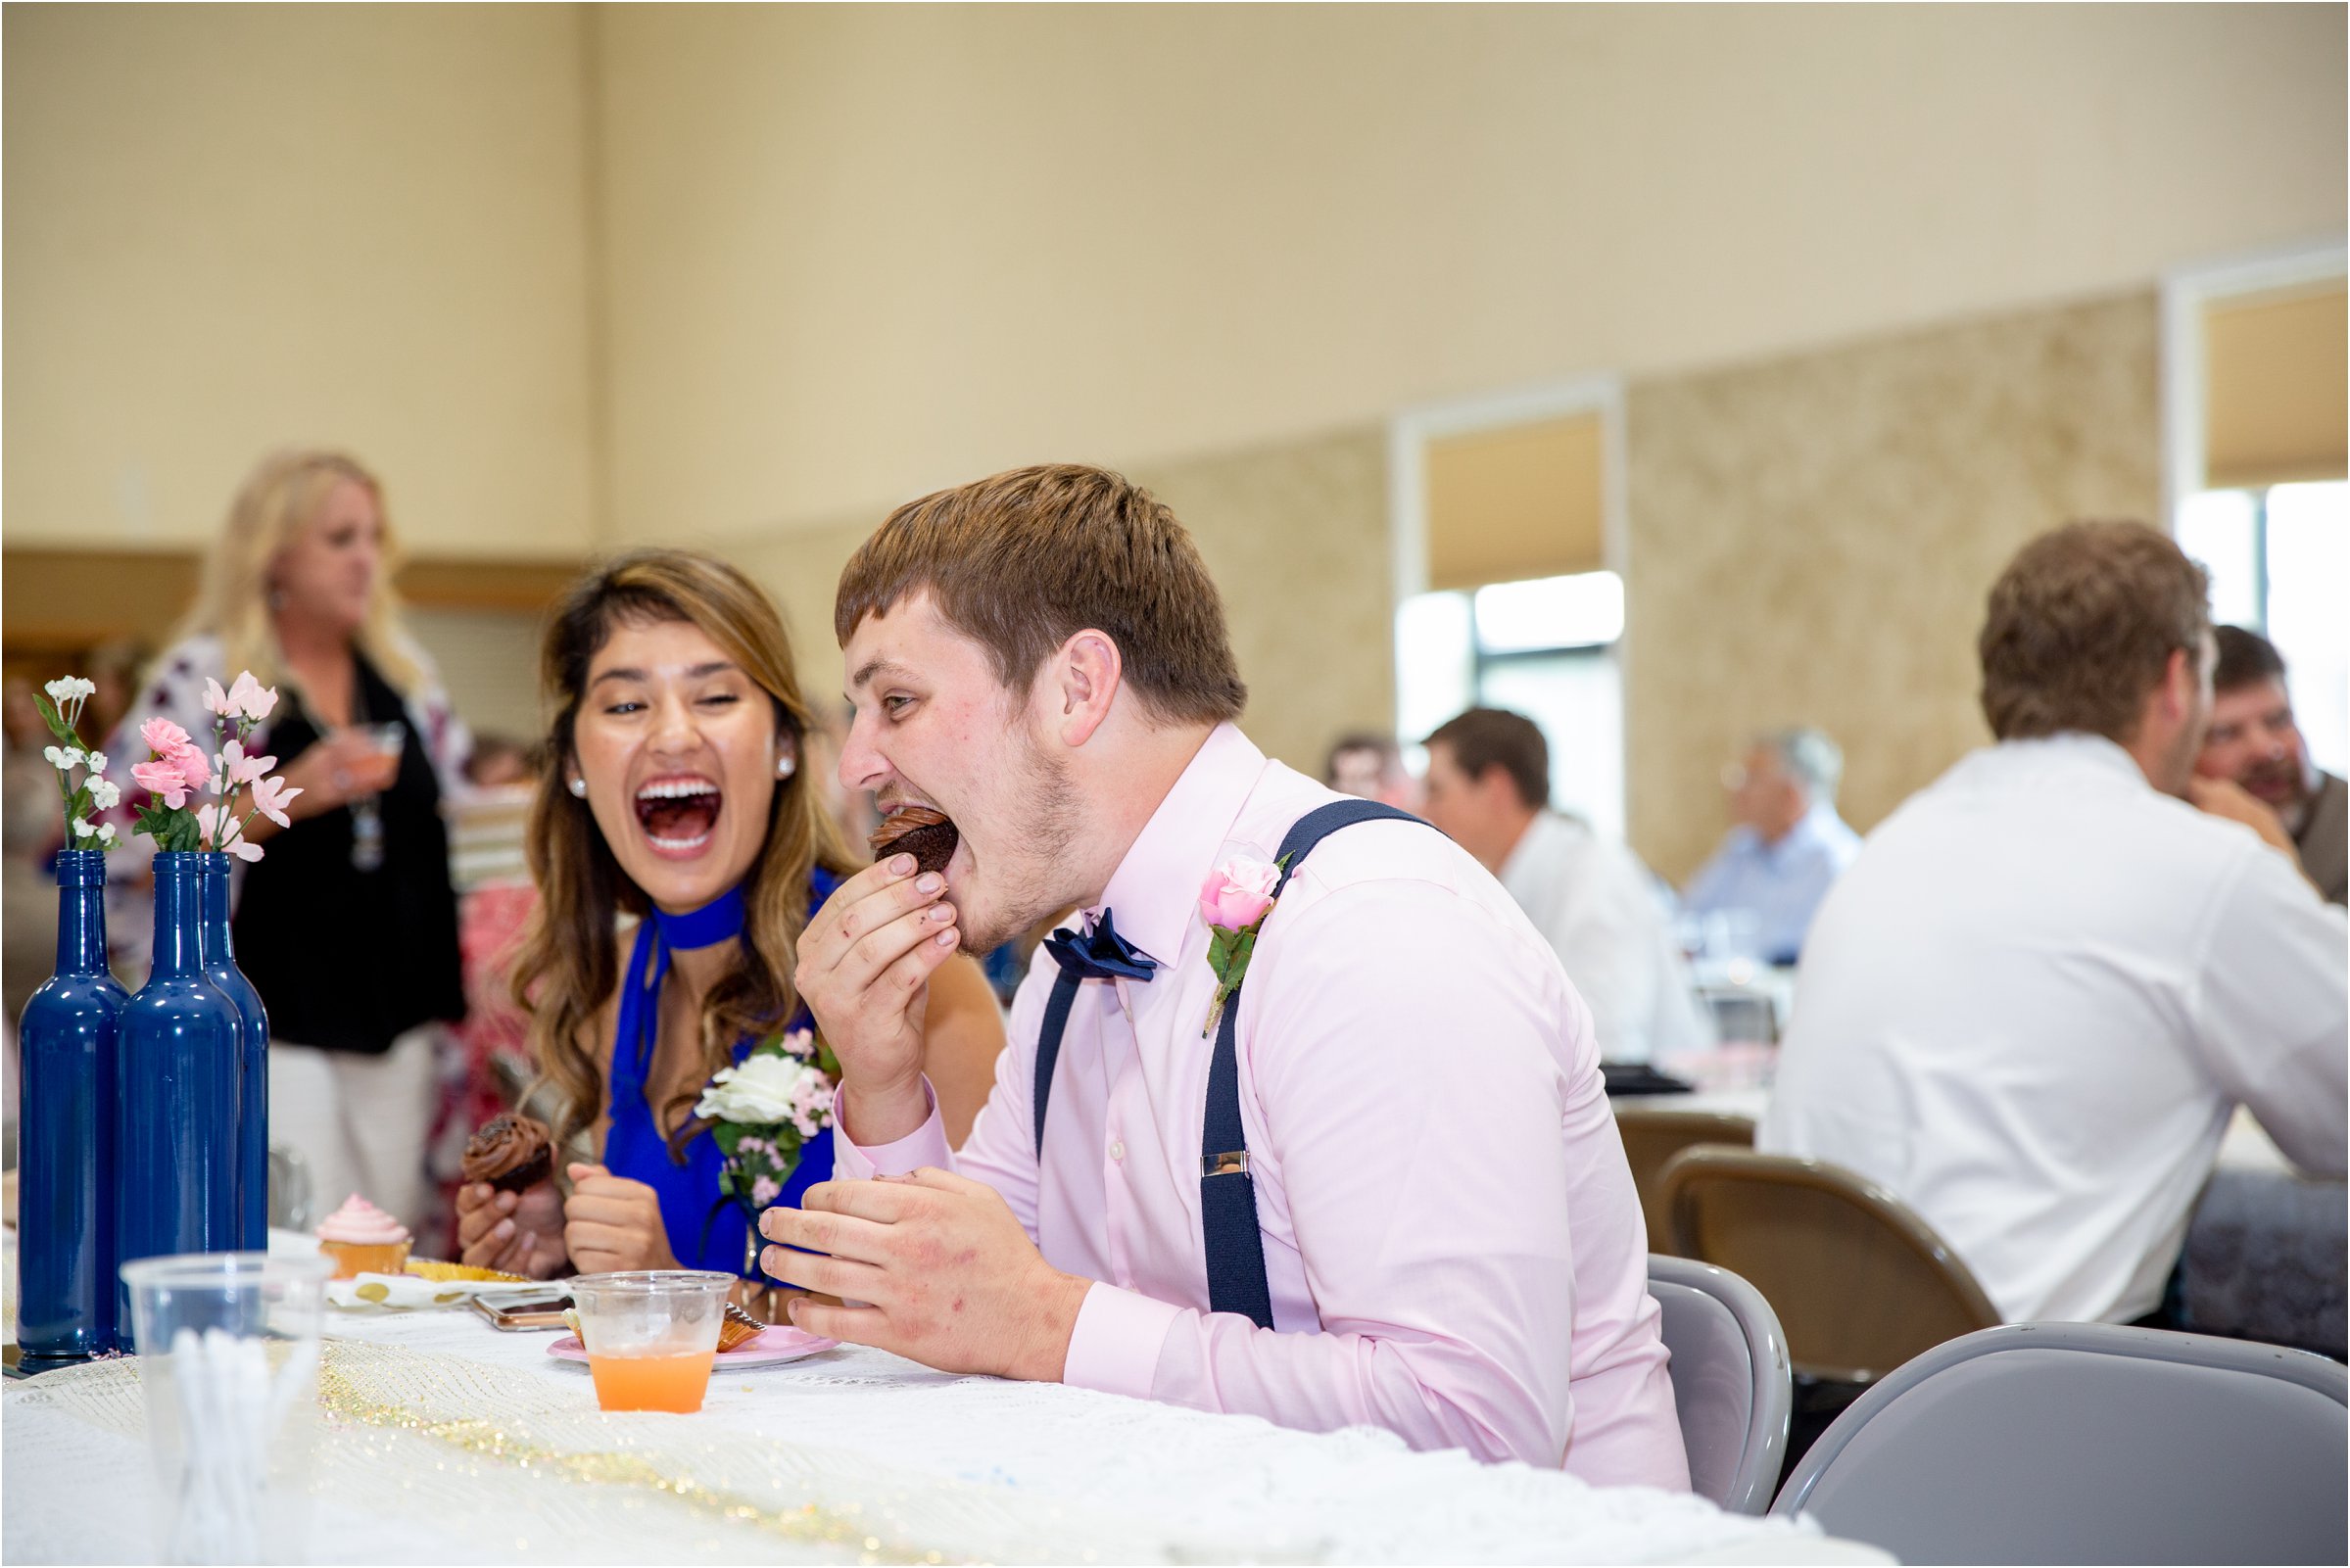 bride's brother eats a cupcake at his sister's wedding reception at holdrege trinity church